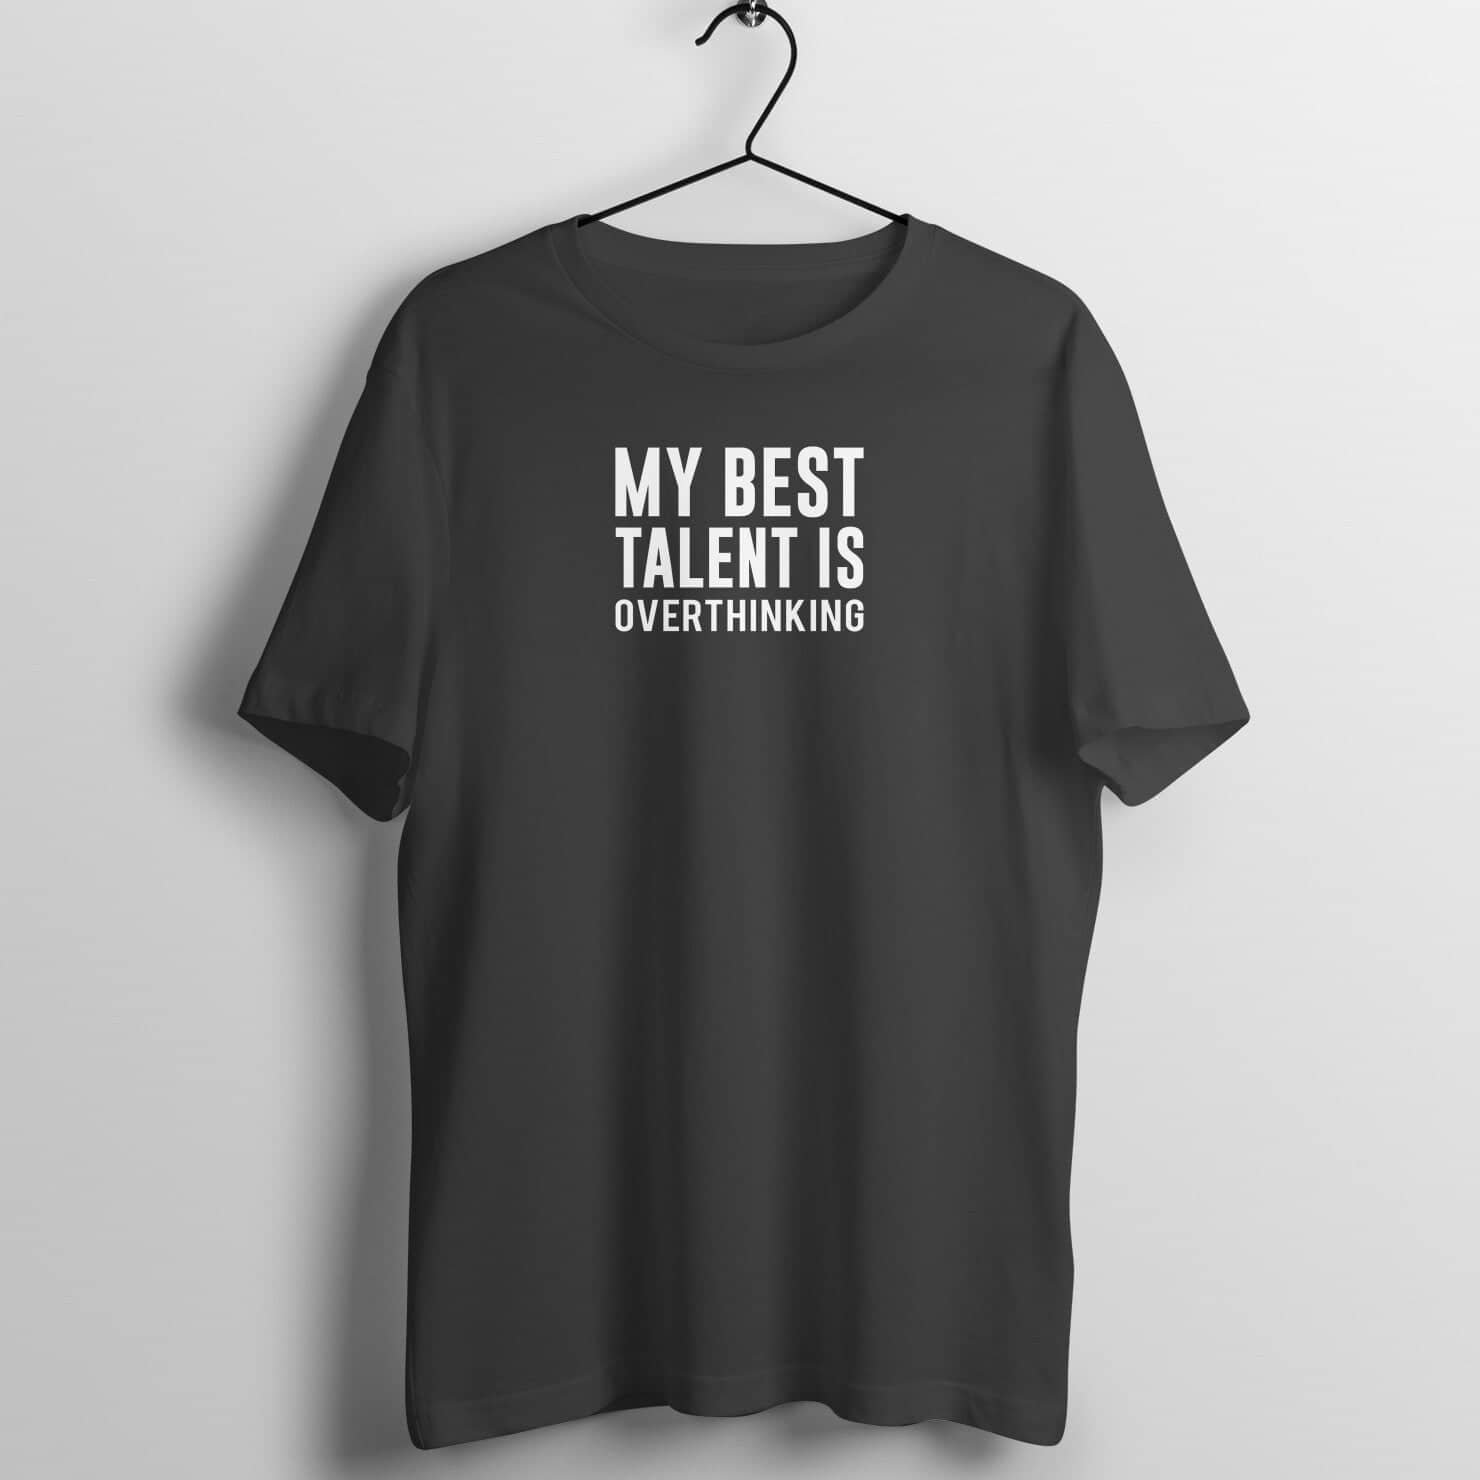 My Best Talent is Overthinking Funny Black T Shirt for Men and Women freeshipping - Catch My Drift India